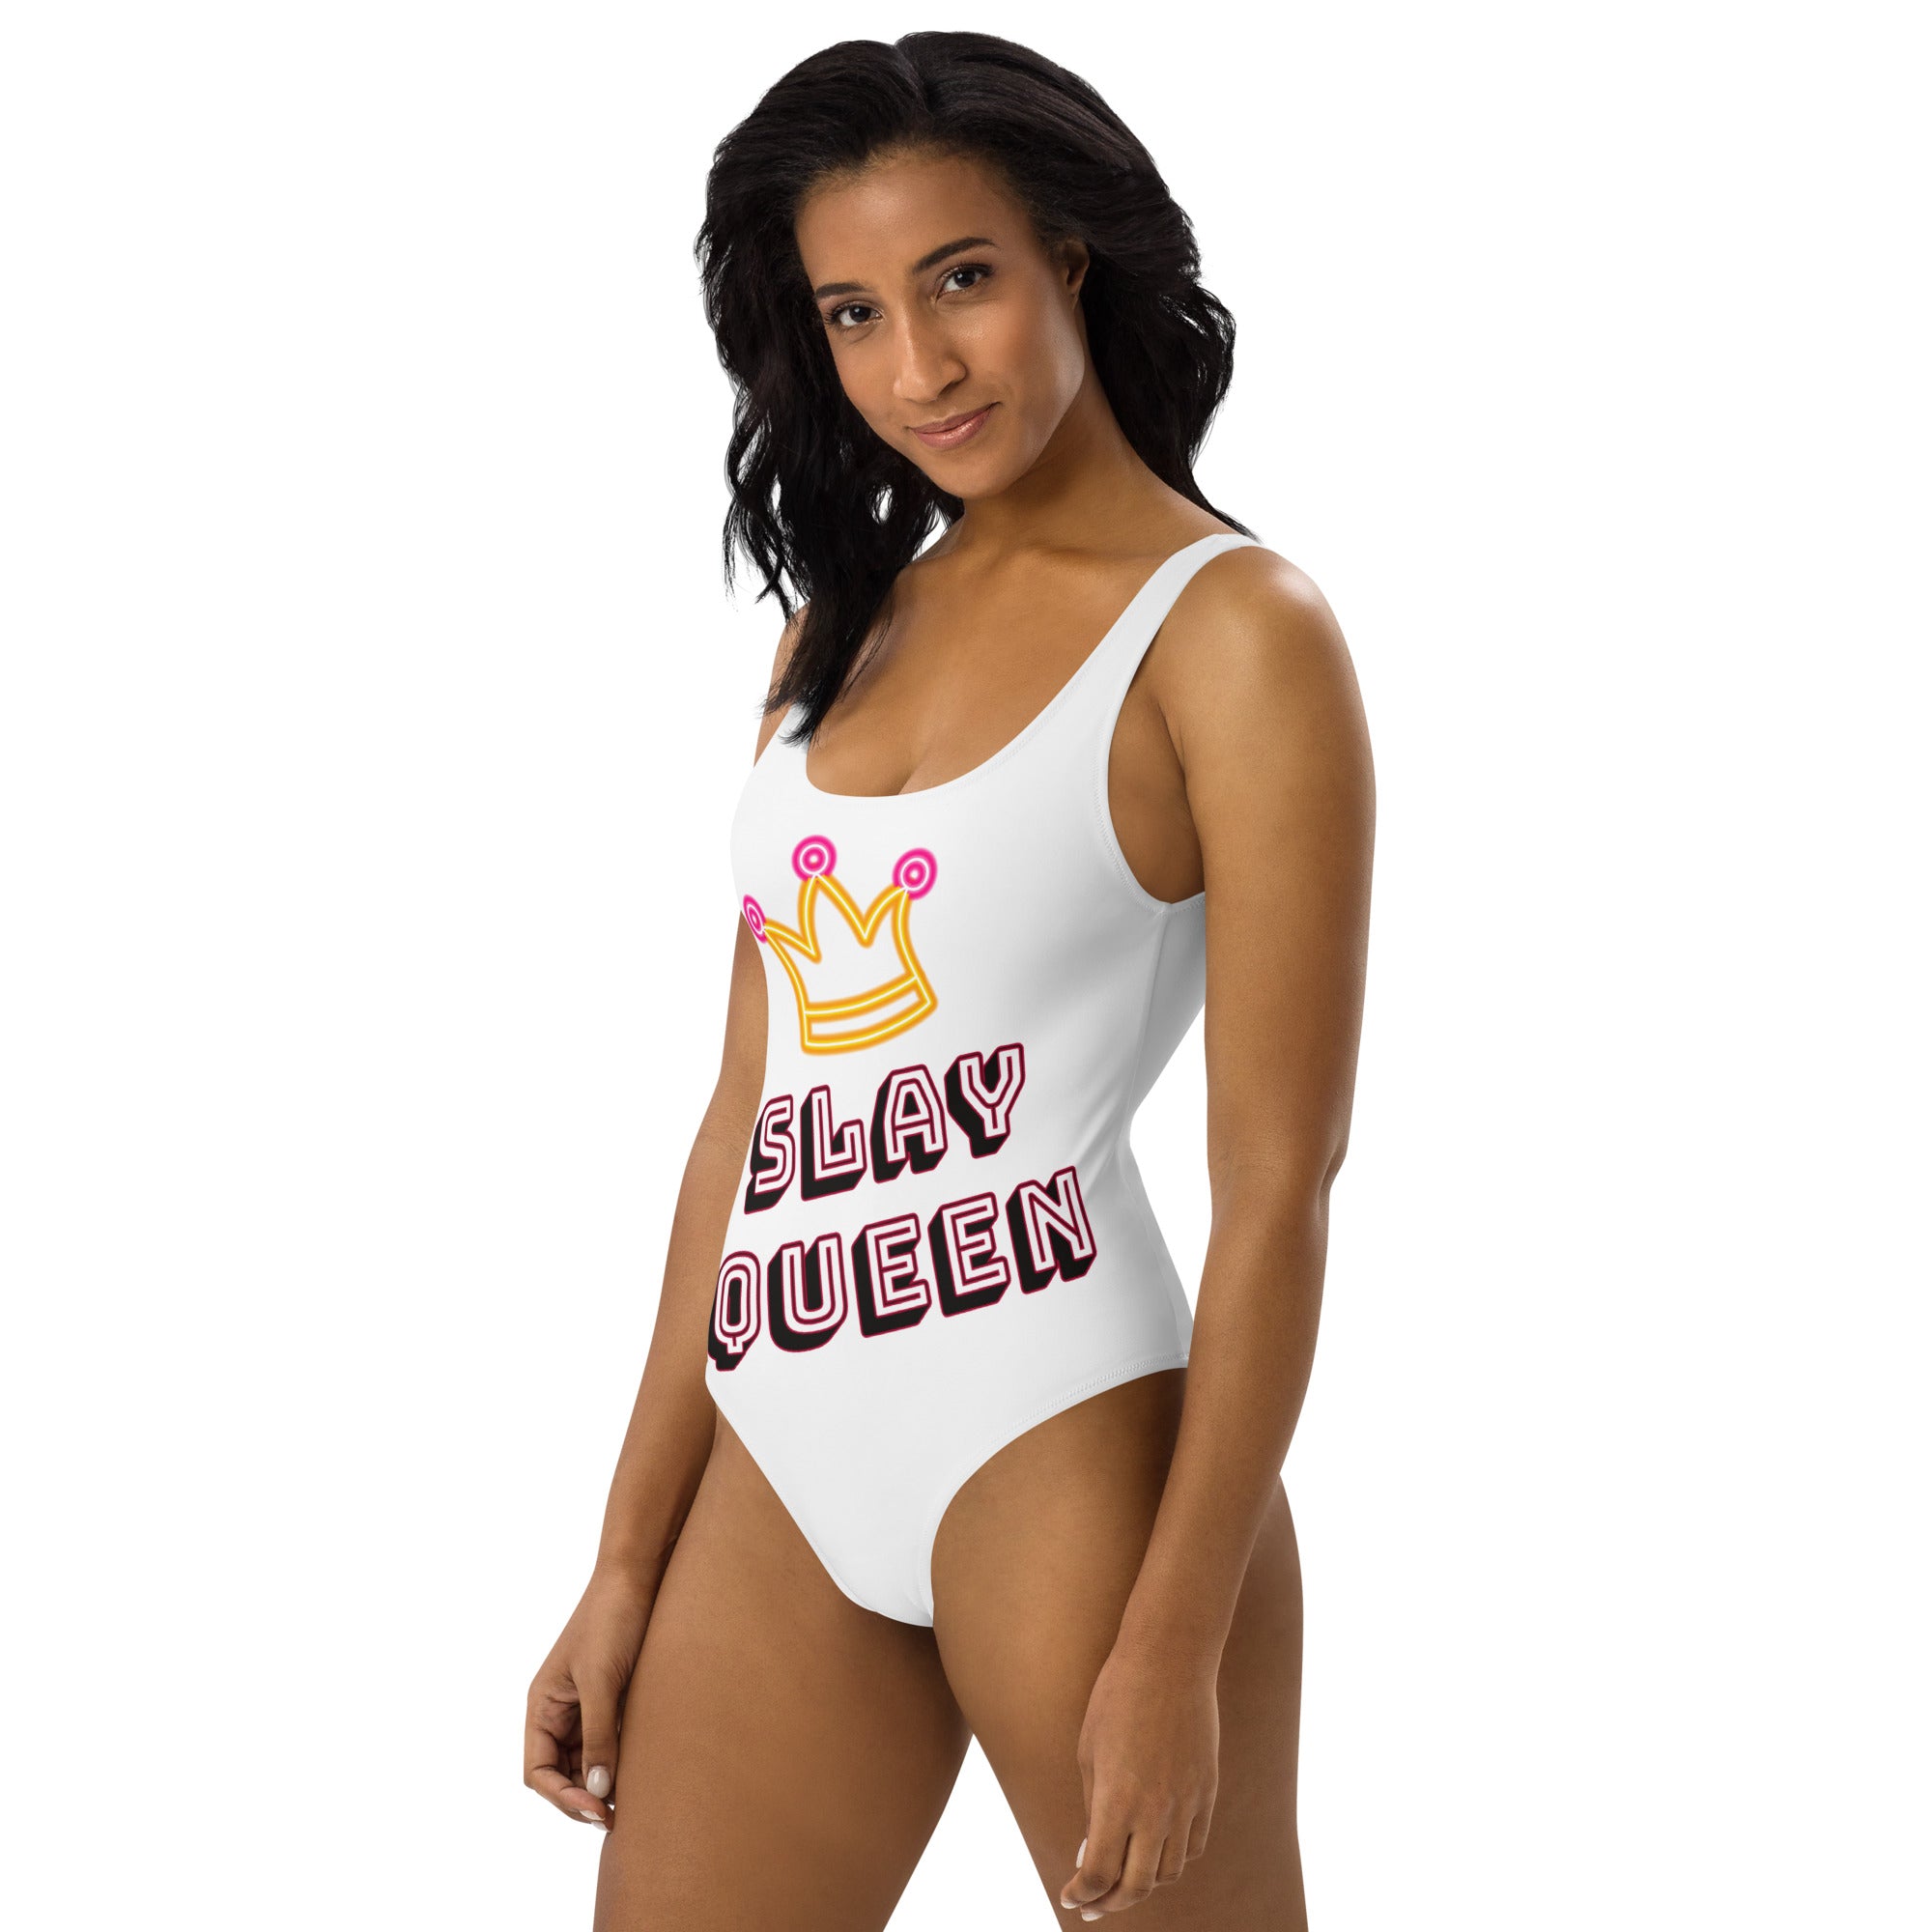 Crowned Slay Queen White One-Piece Swimsuit